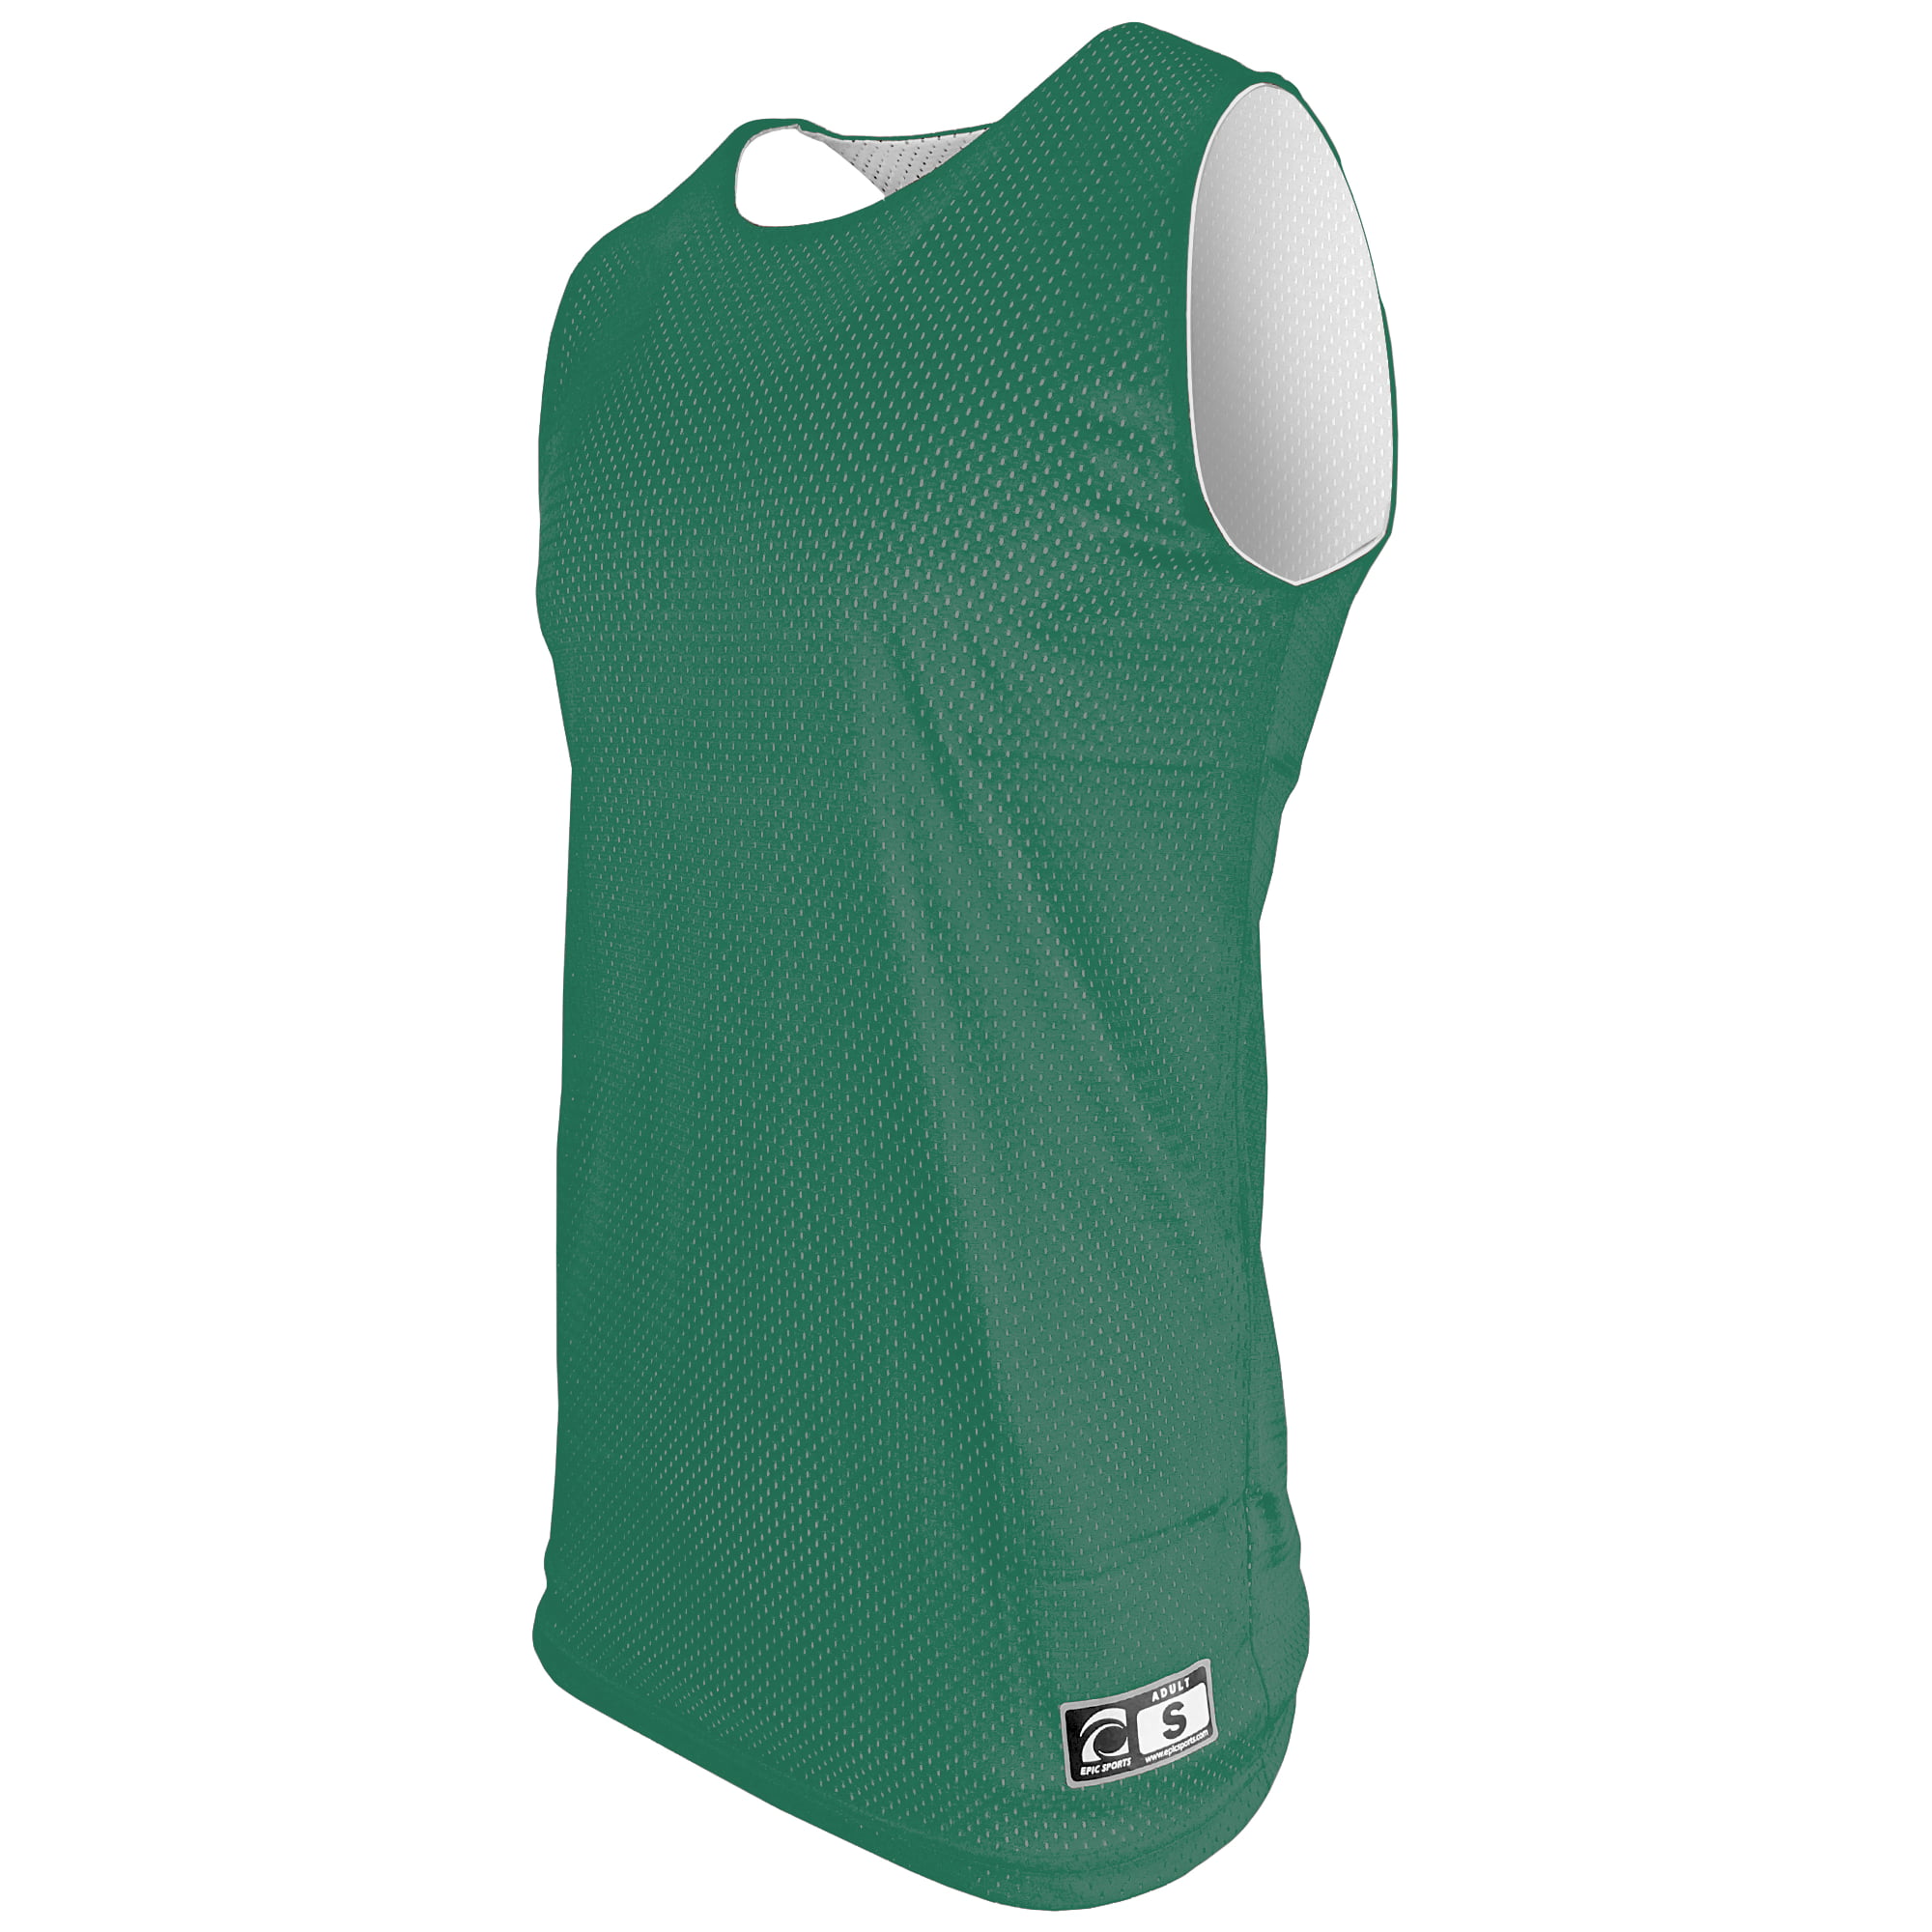 green and white jersey basketball